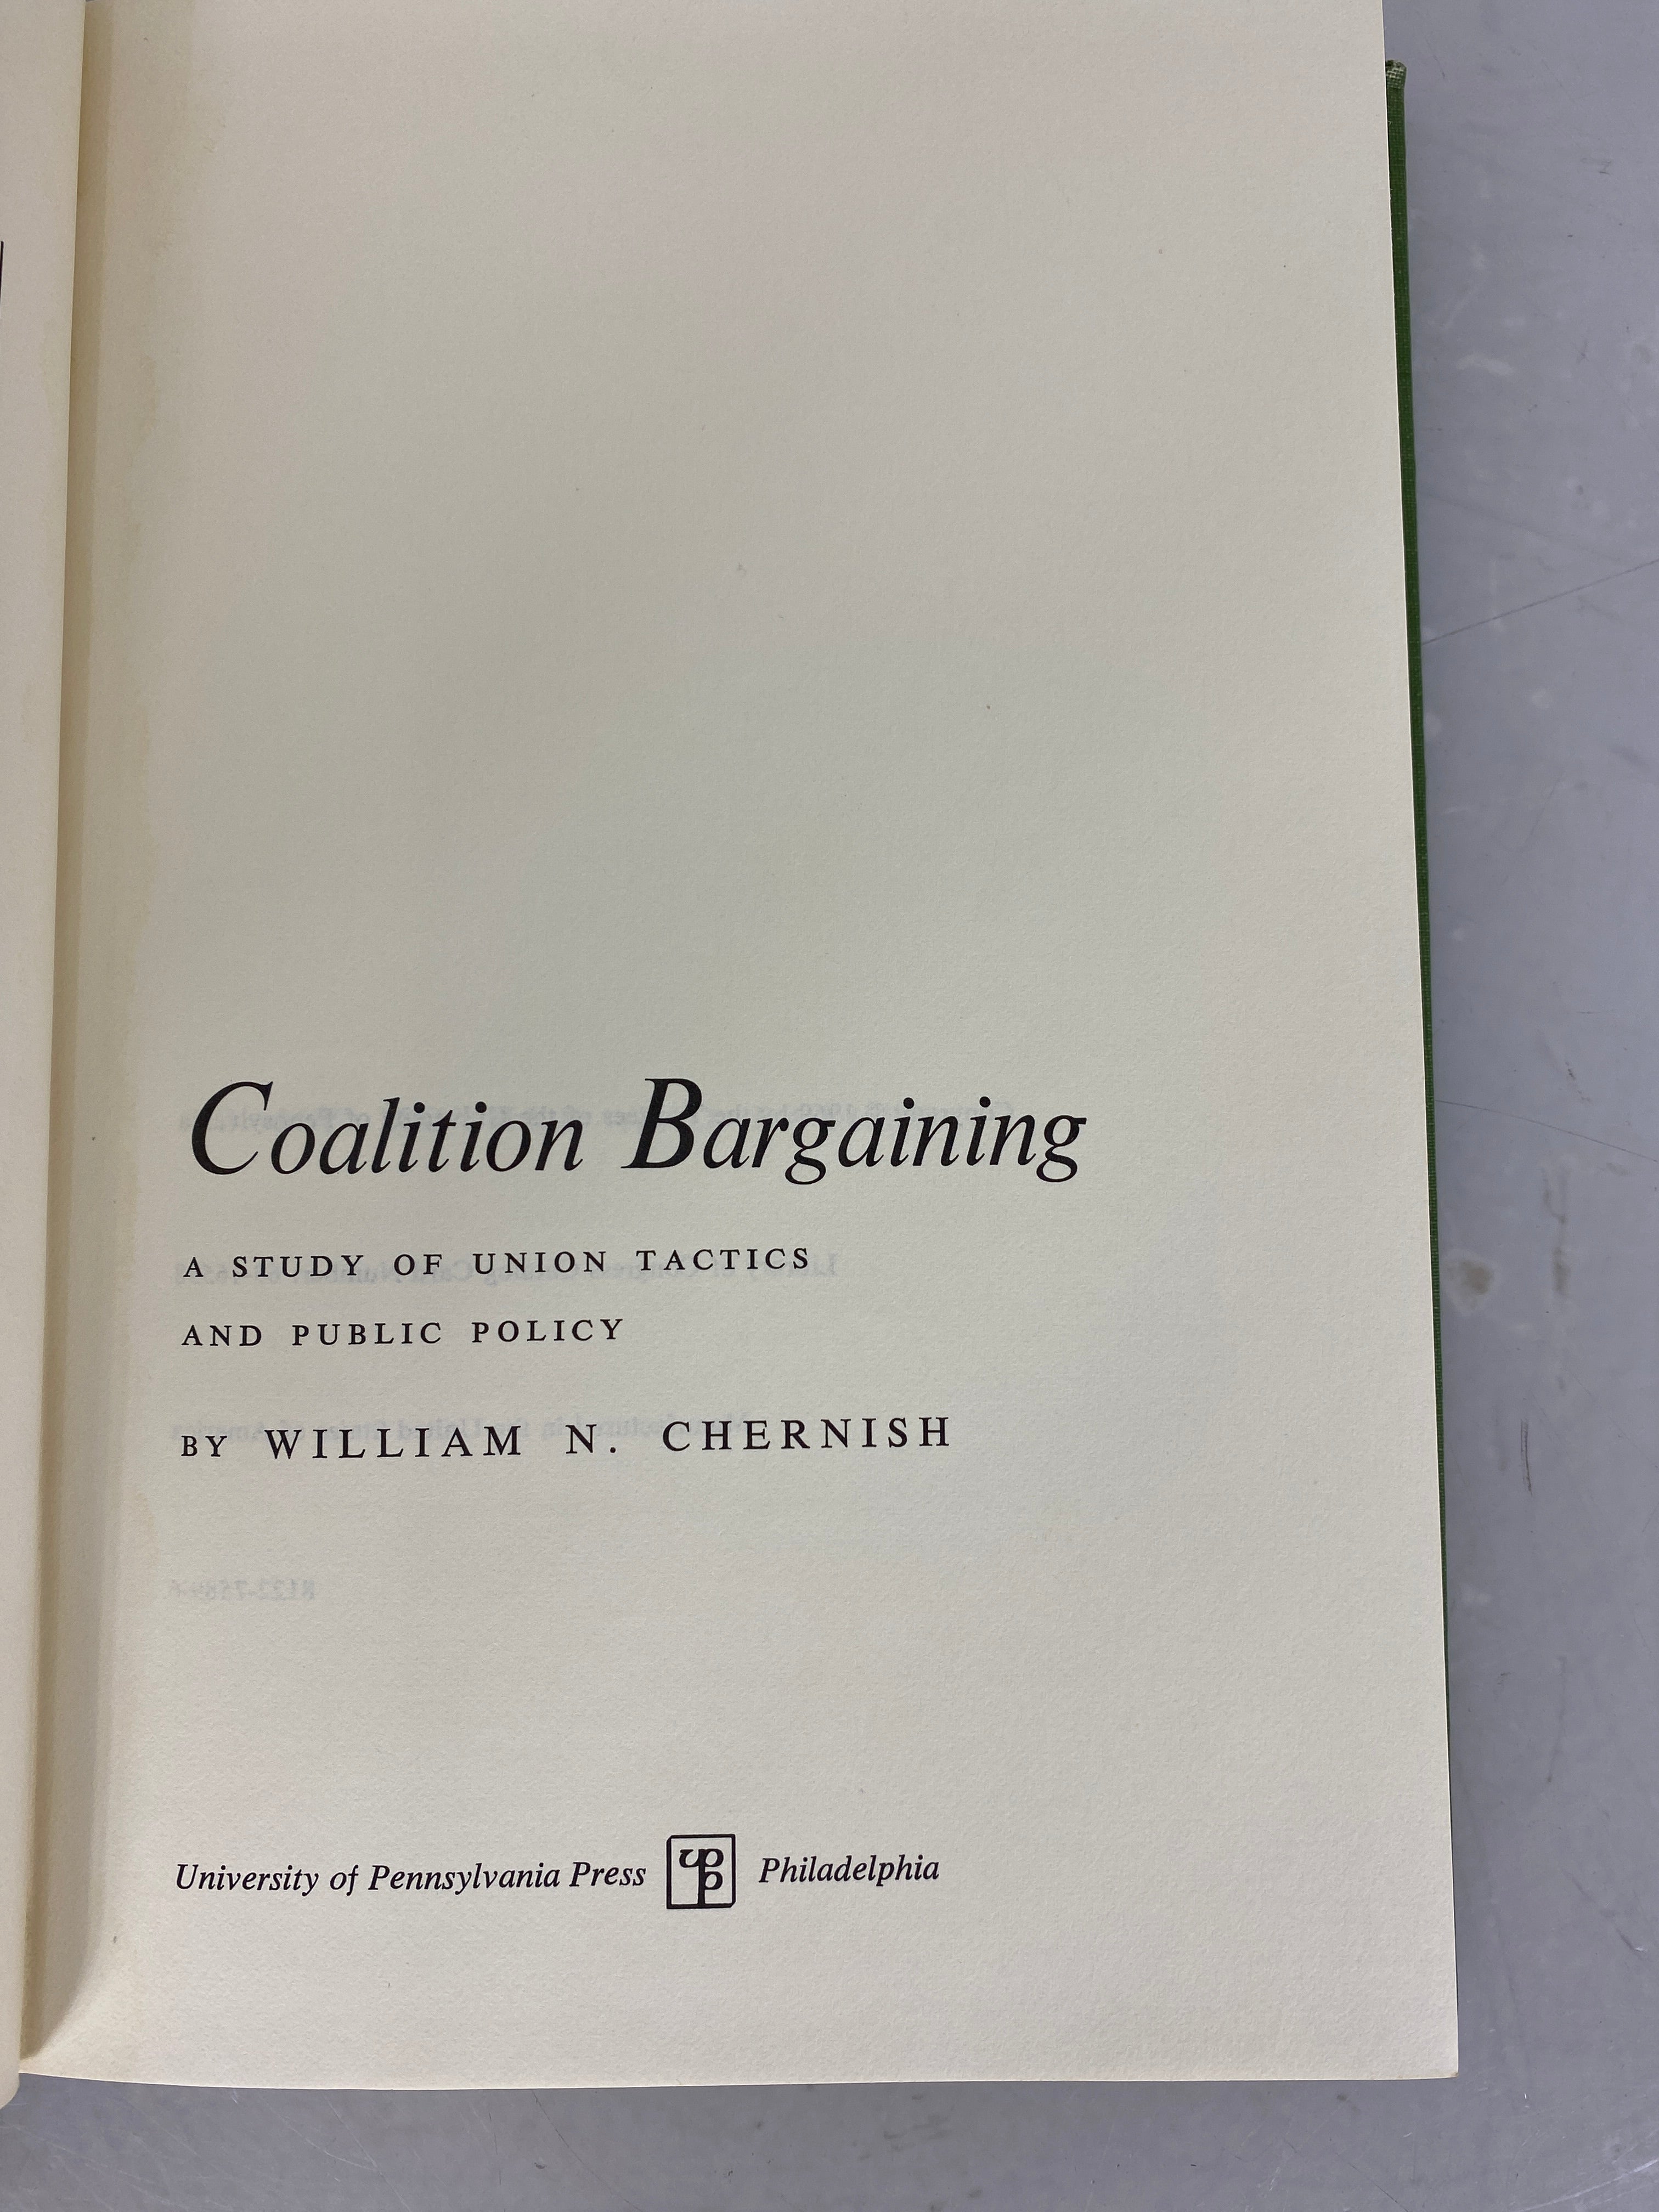 Lot of 2 Collective Bargaining:1971-1980 HC